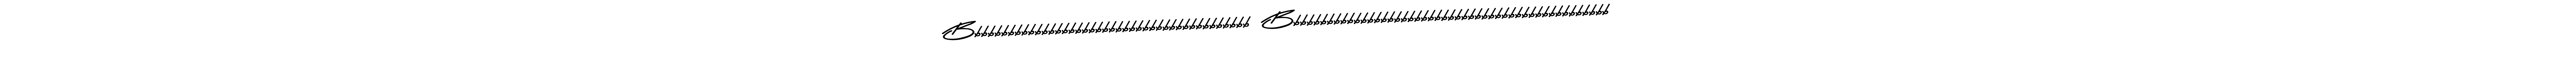 How to Draw Bbbbbbbbbbbbbbbbbbbbbbbbbbbbbbbbbbbbbbbbbb! Bbbbbbbbbbbbbbbbbbbbbbbbbbbbbbbbbbbbbbbbbbbbbbbb signature style? Asem Kandis PERSONAL USE is a latest design signature styles for name Bbbbbbbbbbbbbbbbbbbbbbbbbbbbbbbbbbbbbbbbbb! Bbbbbbbbbbbbbbbbbbbbbbbbbbbbbbbbbbbbbbbbbbbbbbbb. Bbbbbbbbbbbbbbbbbbbbbbbbbbbbbbbbbbbbbbbbbb! Bbbbbbbbbbbbbbbbbbbbbbbbbbbbbbbbbbbbbbbbbbbbbbbb signature style 9 images and pictures png